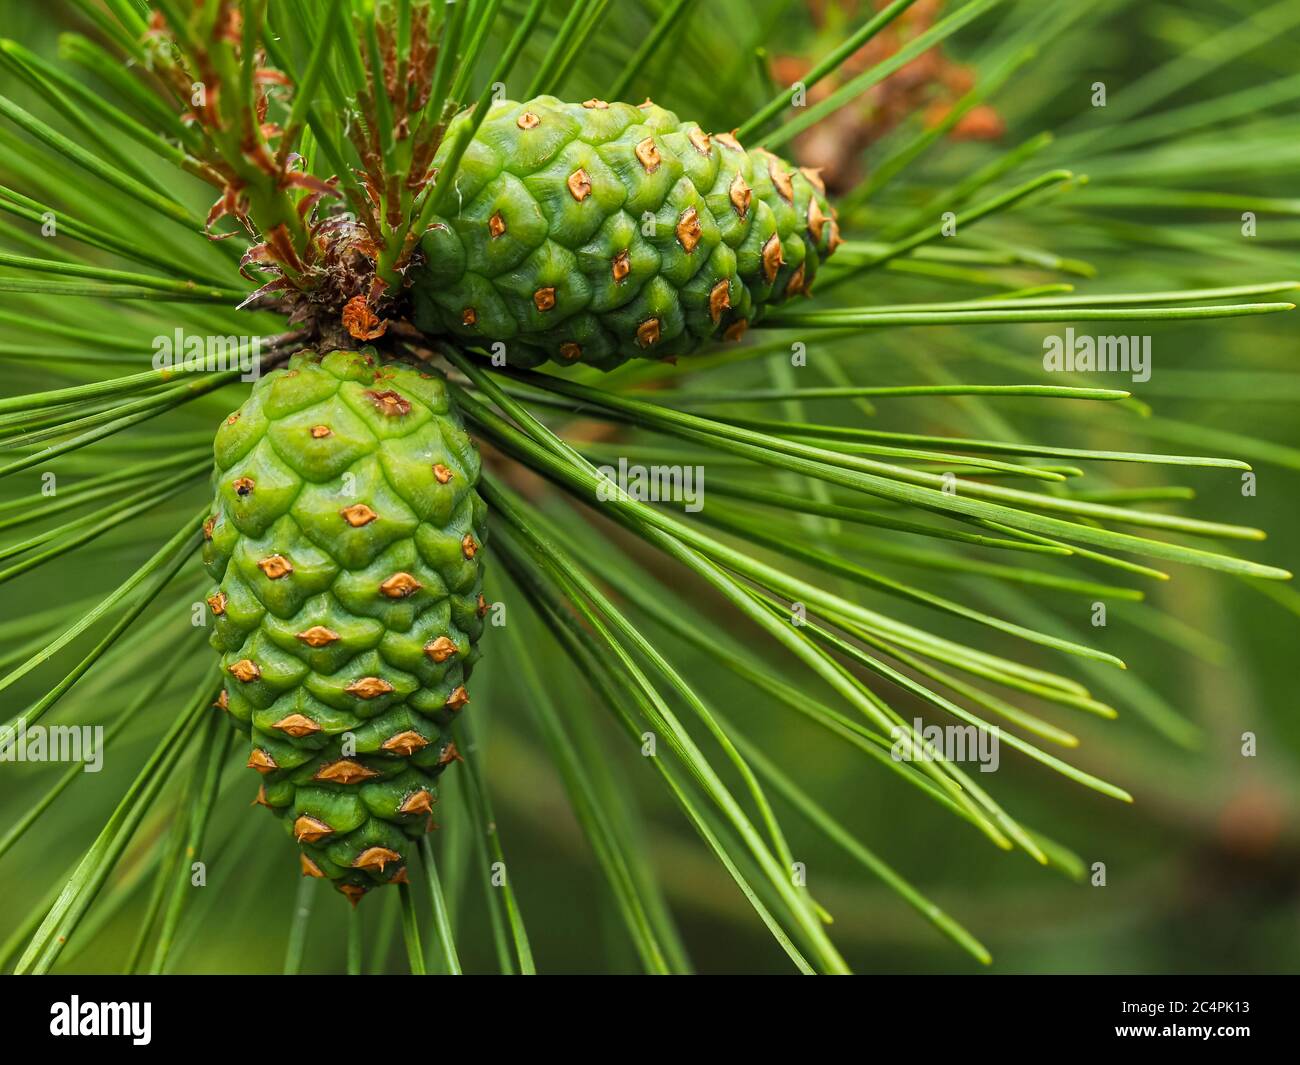 Young green cones on a branch of a Japanese red pine tree, Pinus densiflora Stock Photo